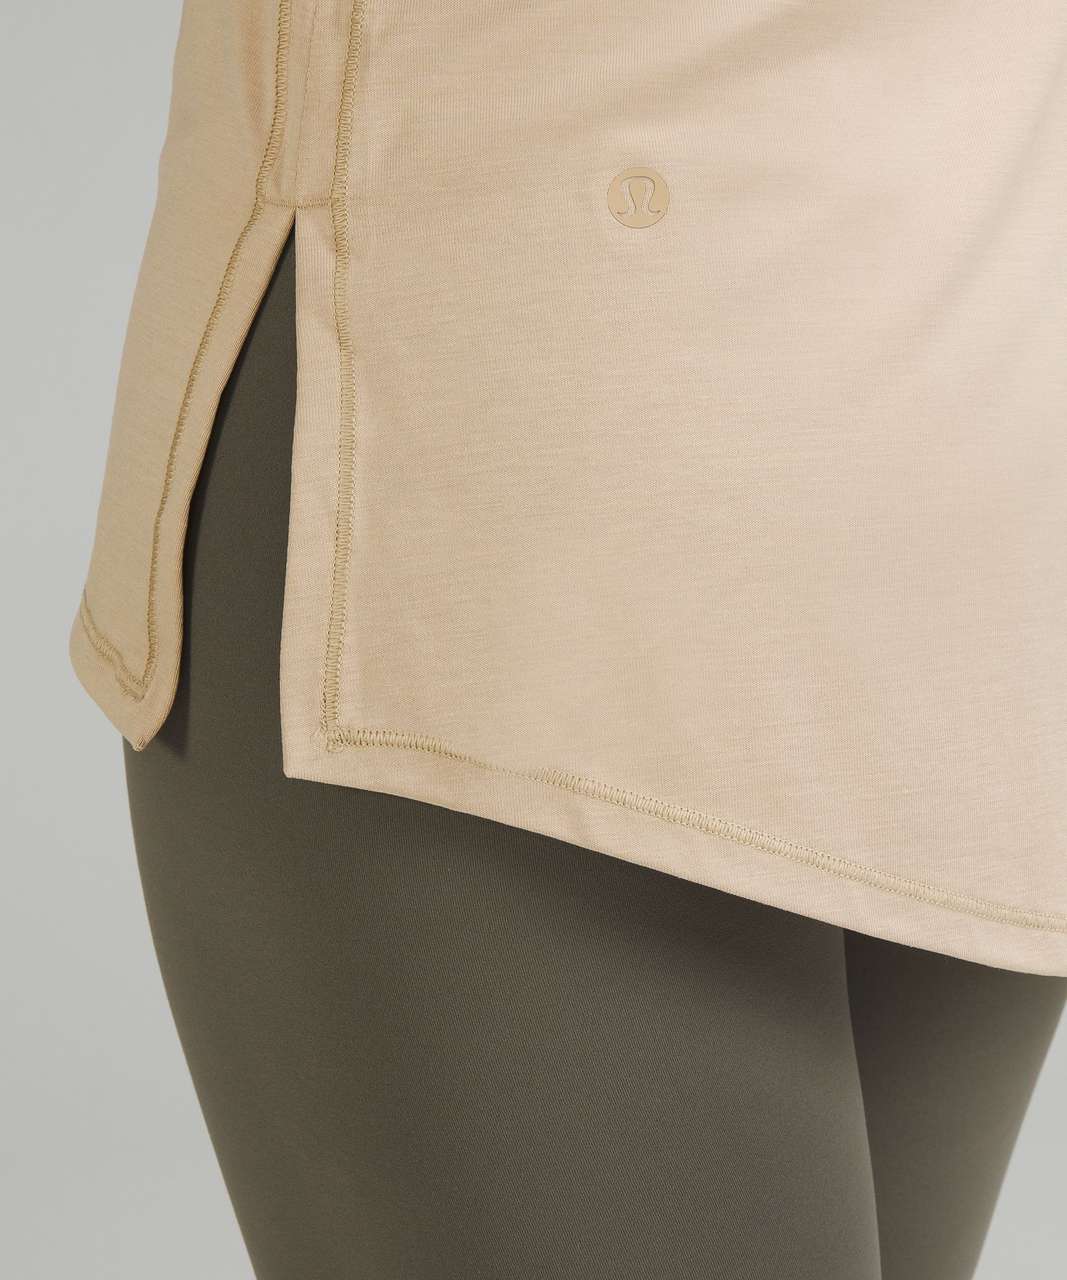 Lululemon Ease of It All Tank Top - Trench